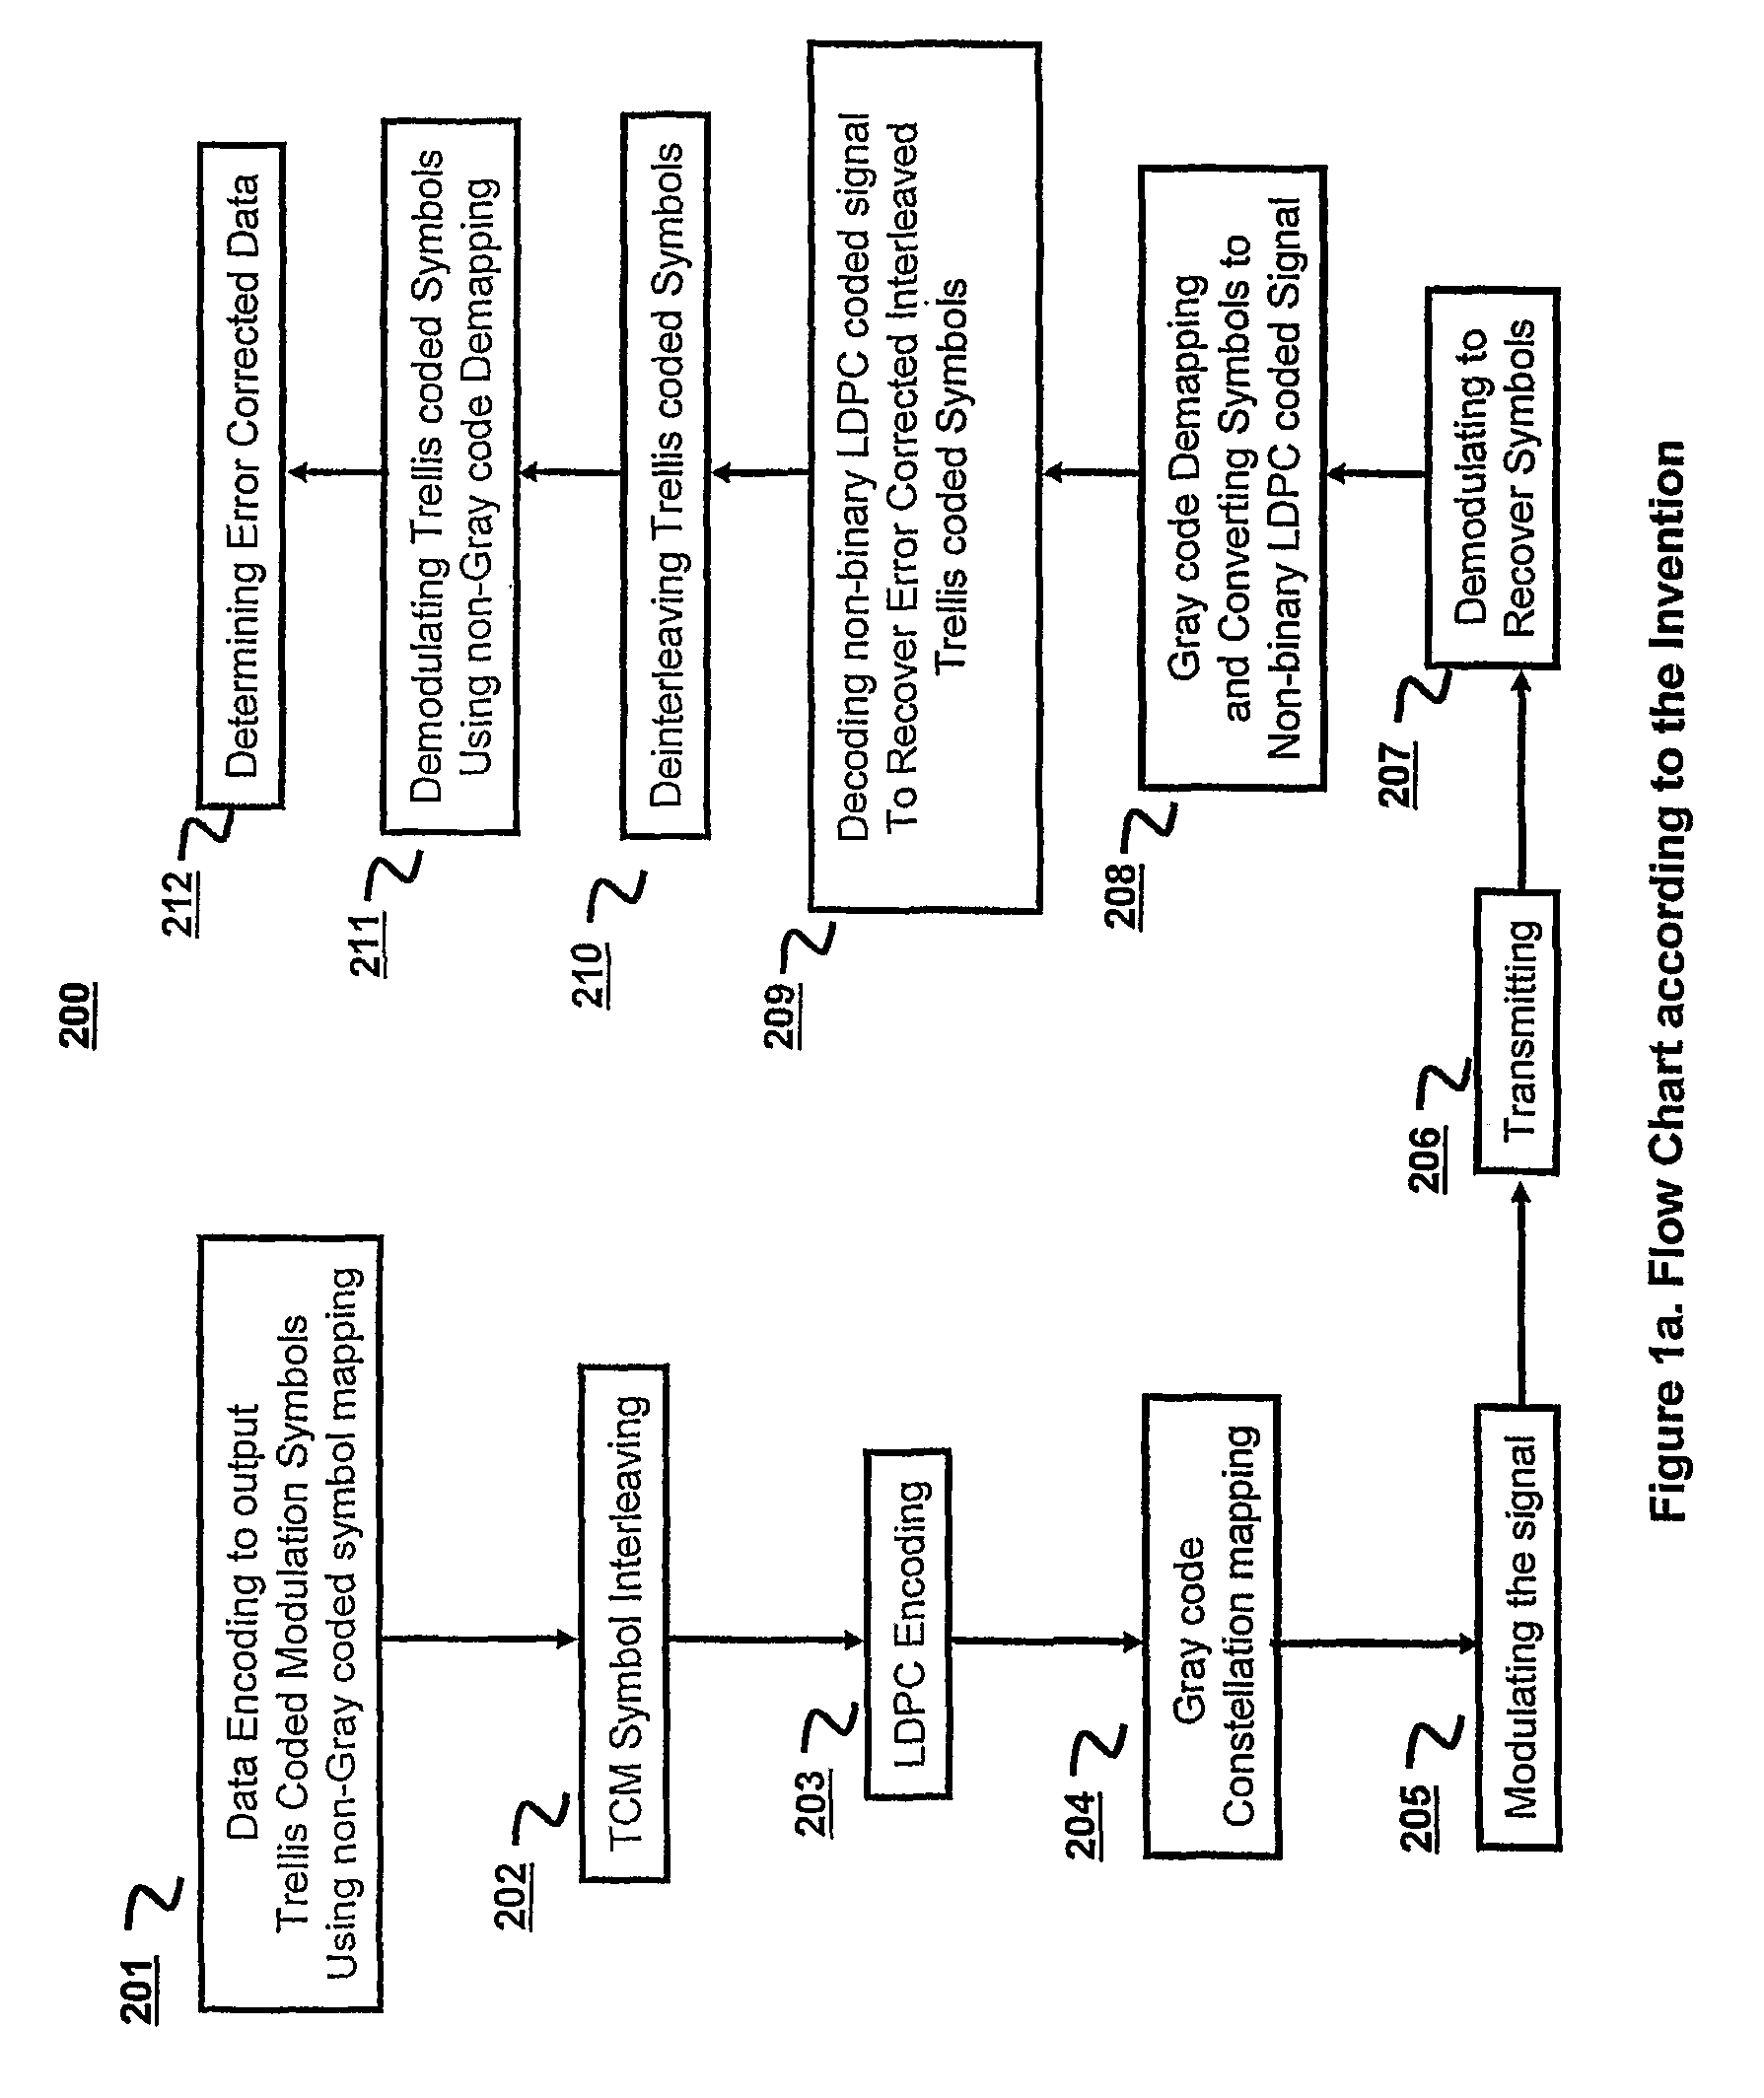 Serial concatenation of trellis coded modulation and an inner non-binary LDPC code